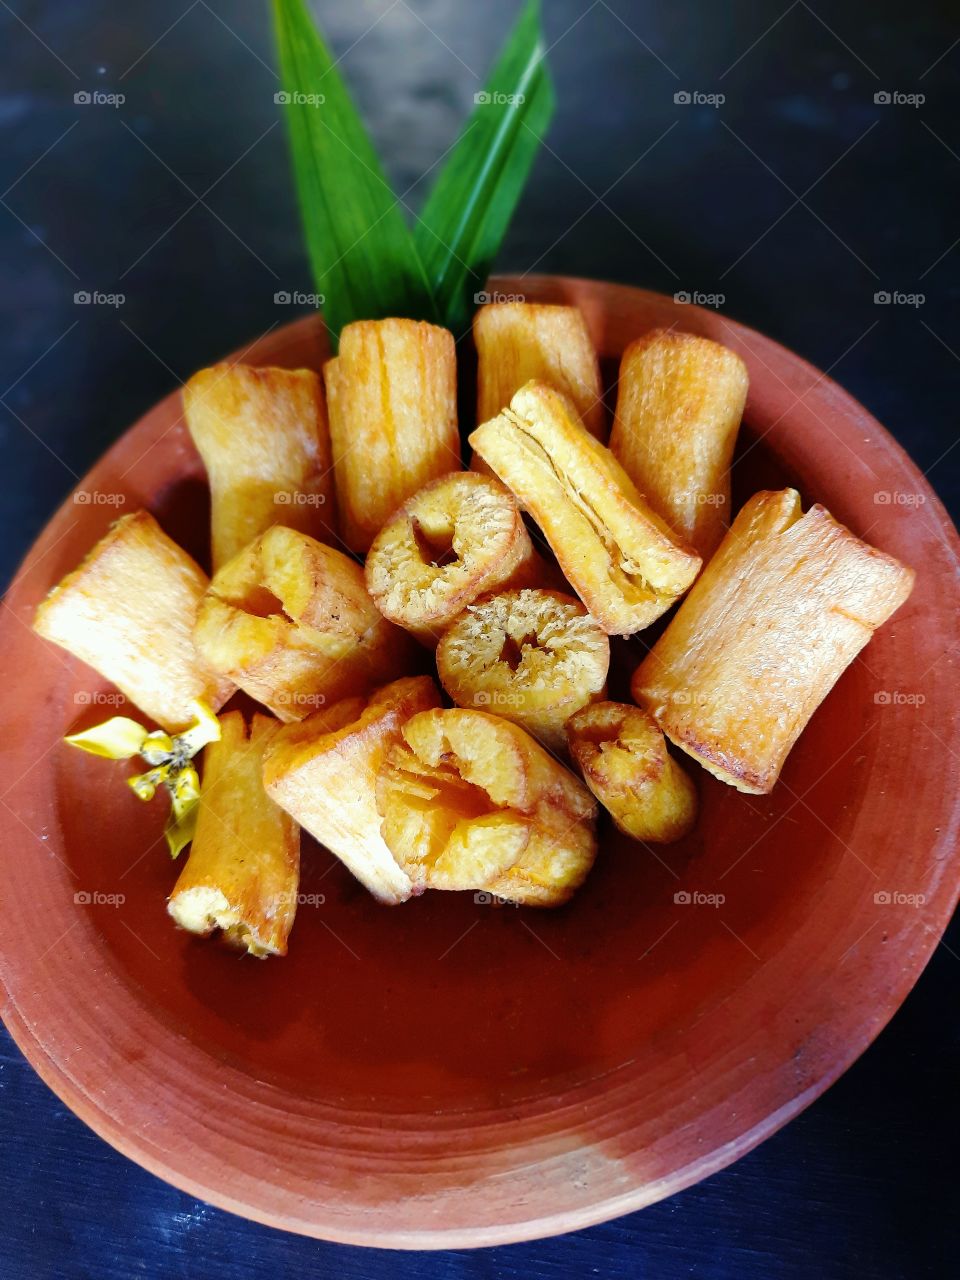 this is fried cassava.  Umbria is widely known as a staple food producing carbohydrates.  In Indonesia, cassava is usually used for heavy food or snacks.  usually fried or steamed. This food is very famous in Indonesia.